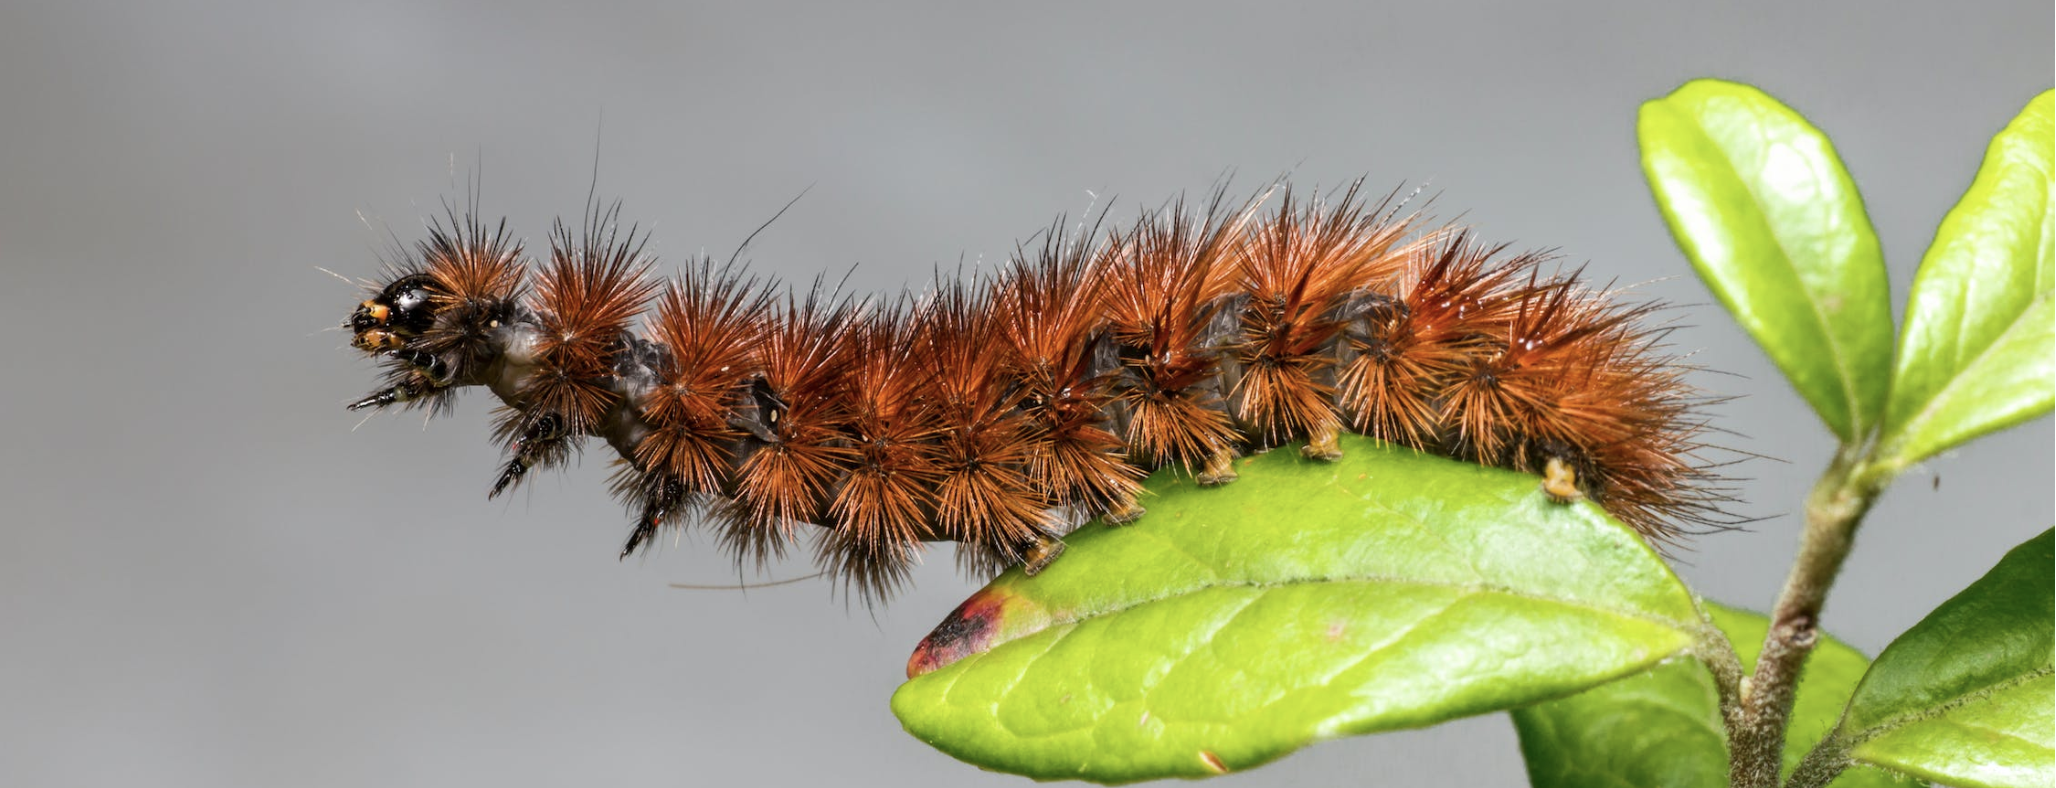 Fuzzy caterpillars: Are they cute? Yes. Should you touch them? Definitely not.